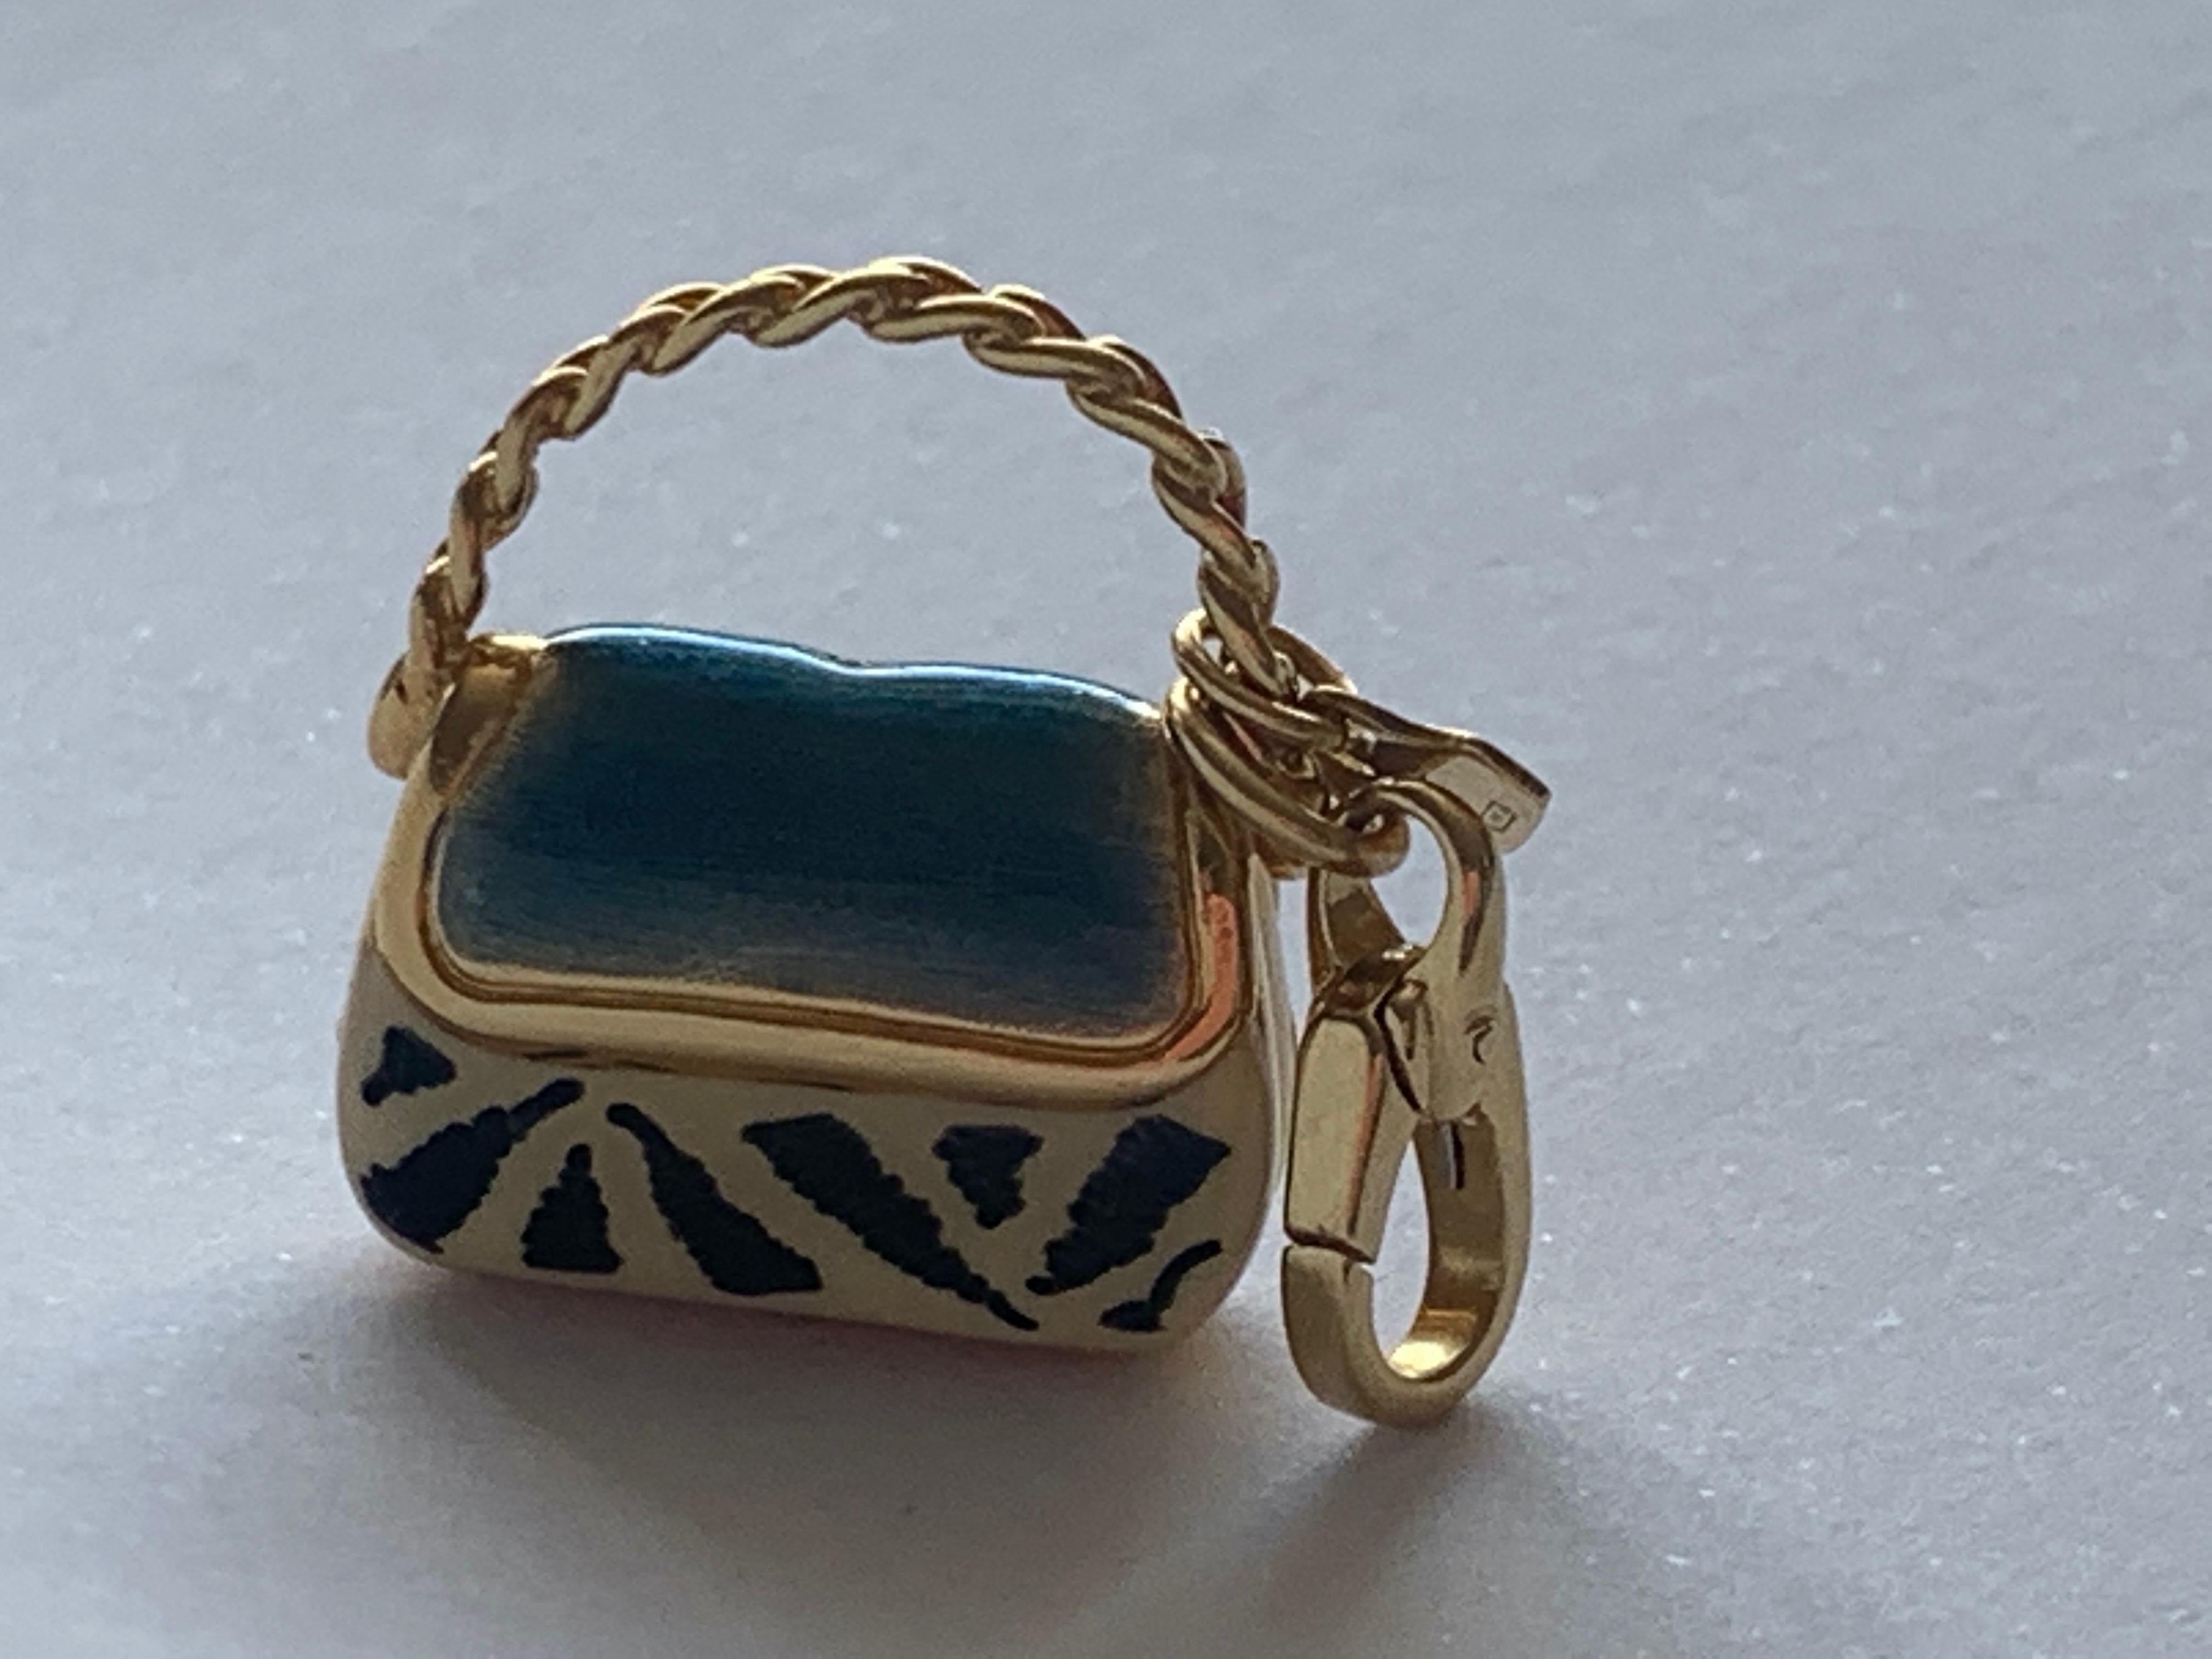 Pretty Enamelled 18ct Gold Charm
By Italian Jeweller Rosato
Enamelled Airforce blue top and Zebra stripes Black & Cream 
Hollow Charm 
Weight 4.85 grammes